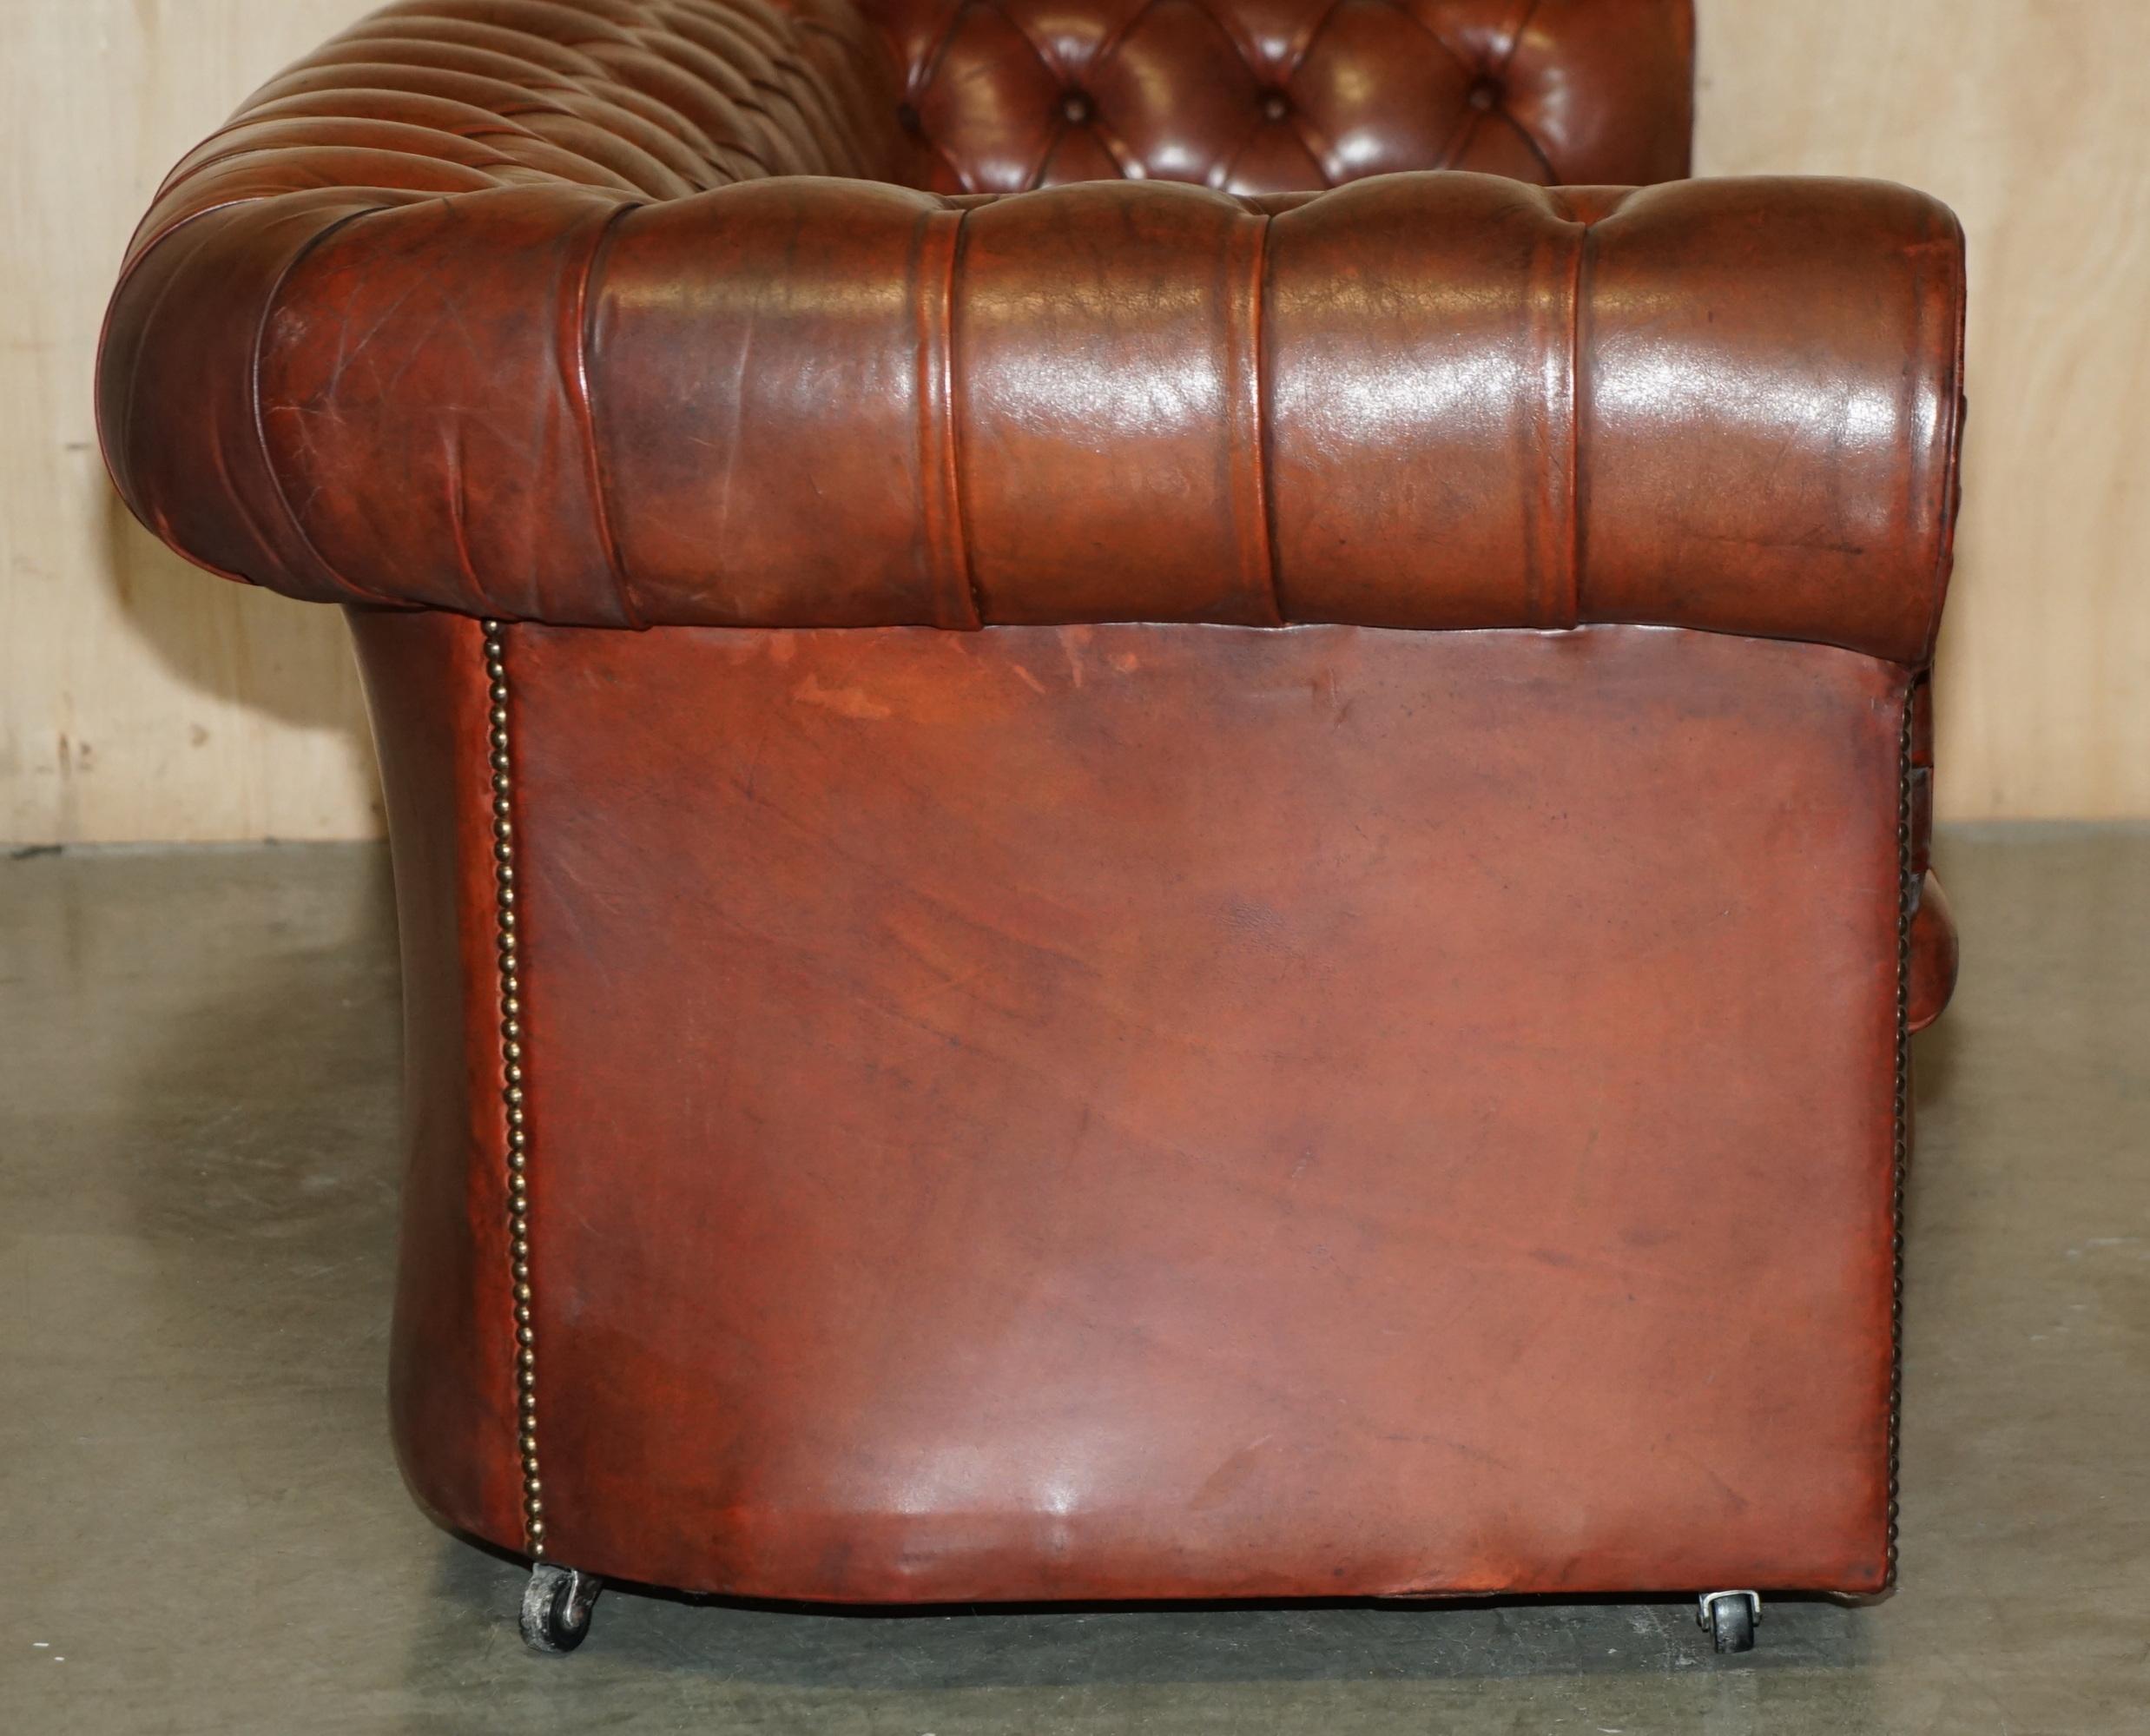 FULLY COIL SPRUNG VINTAGE 1920's HAND DYED BROWN LEATHER CHESTERFIELD CLUB SOFA For Sale 4